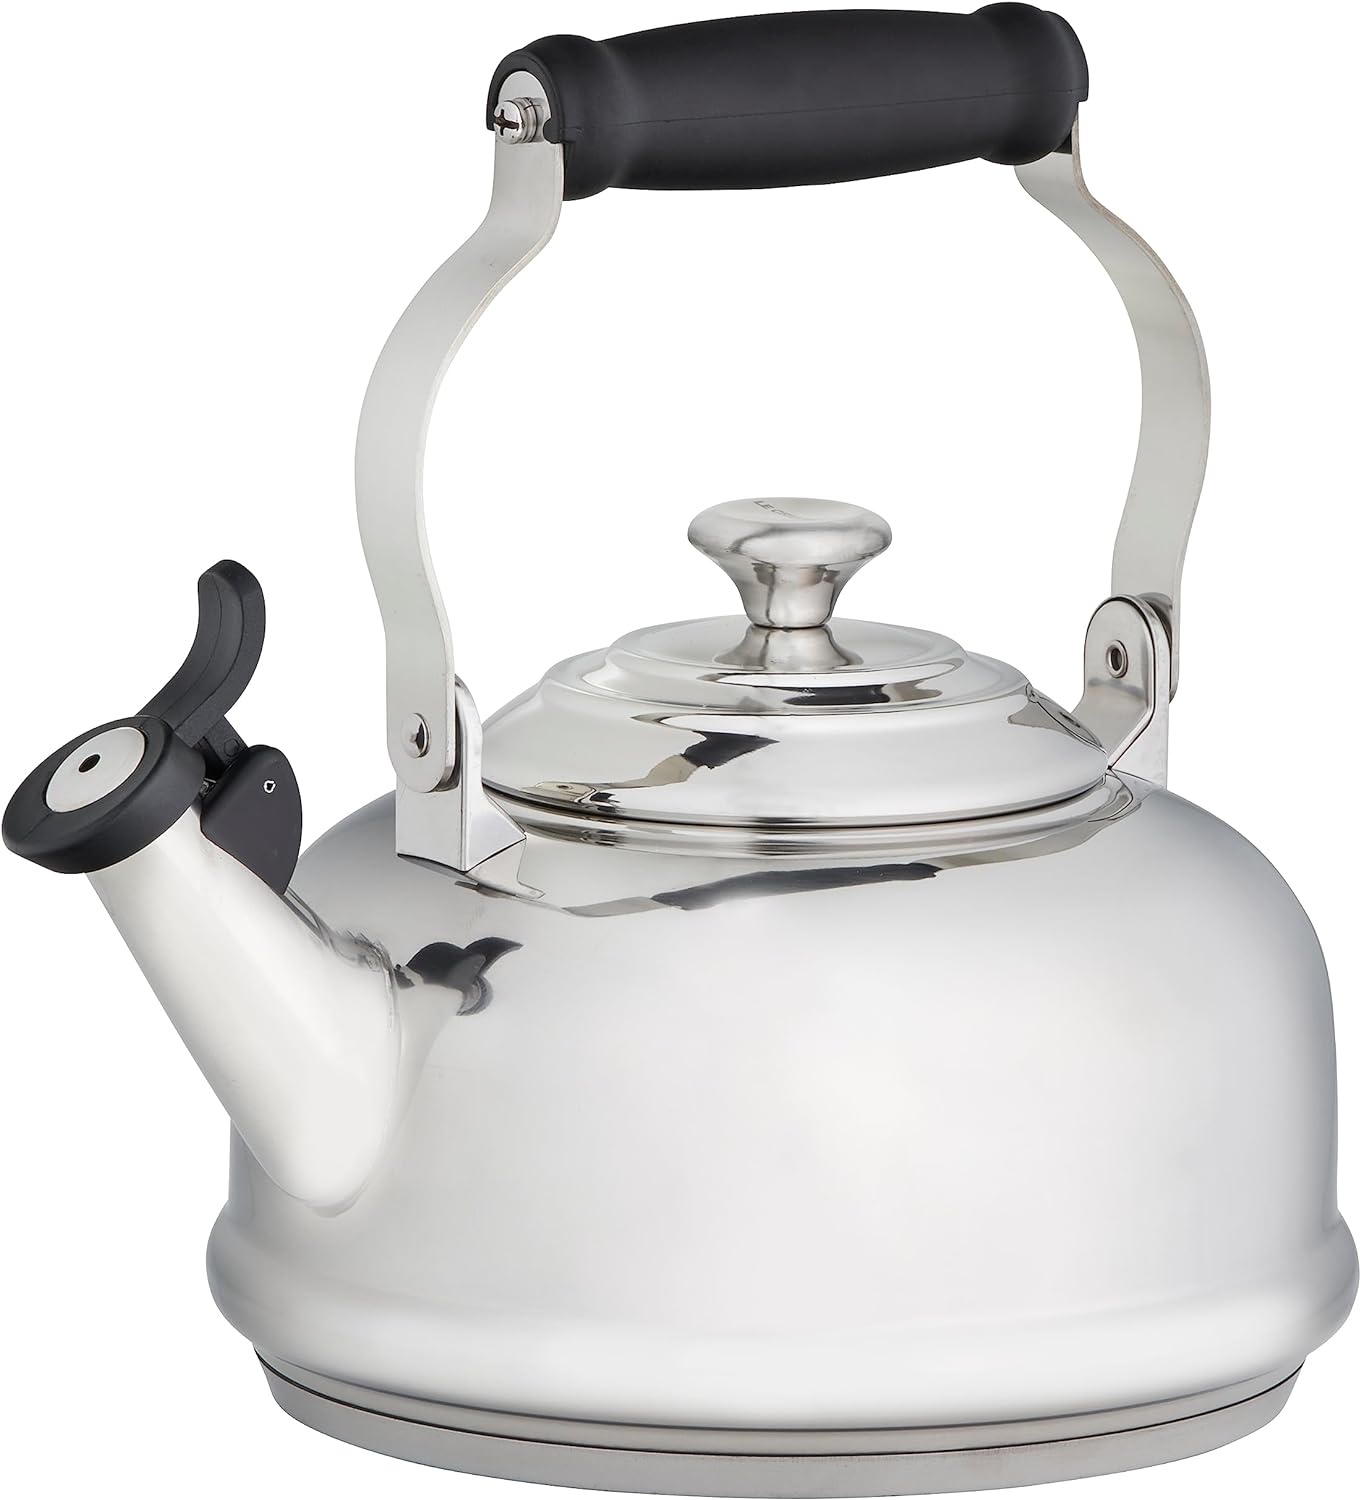 Le Creuset 1.7 Qt. Whistling Kettle w/Stainless Steel Knob